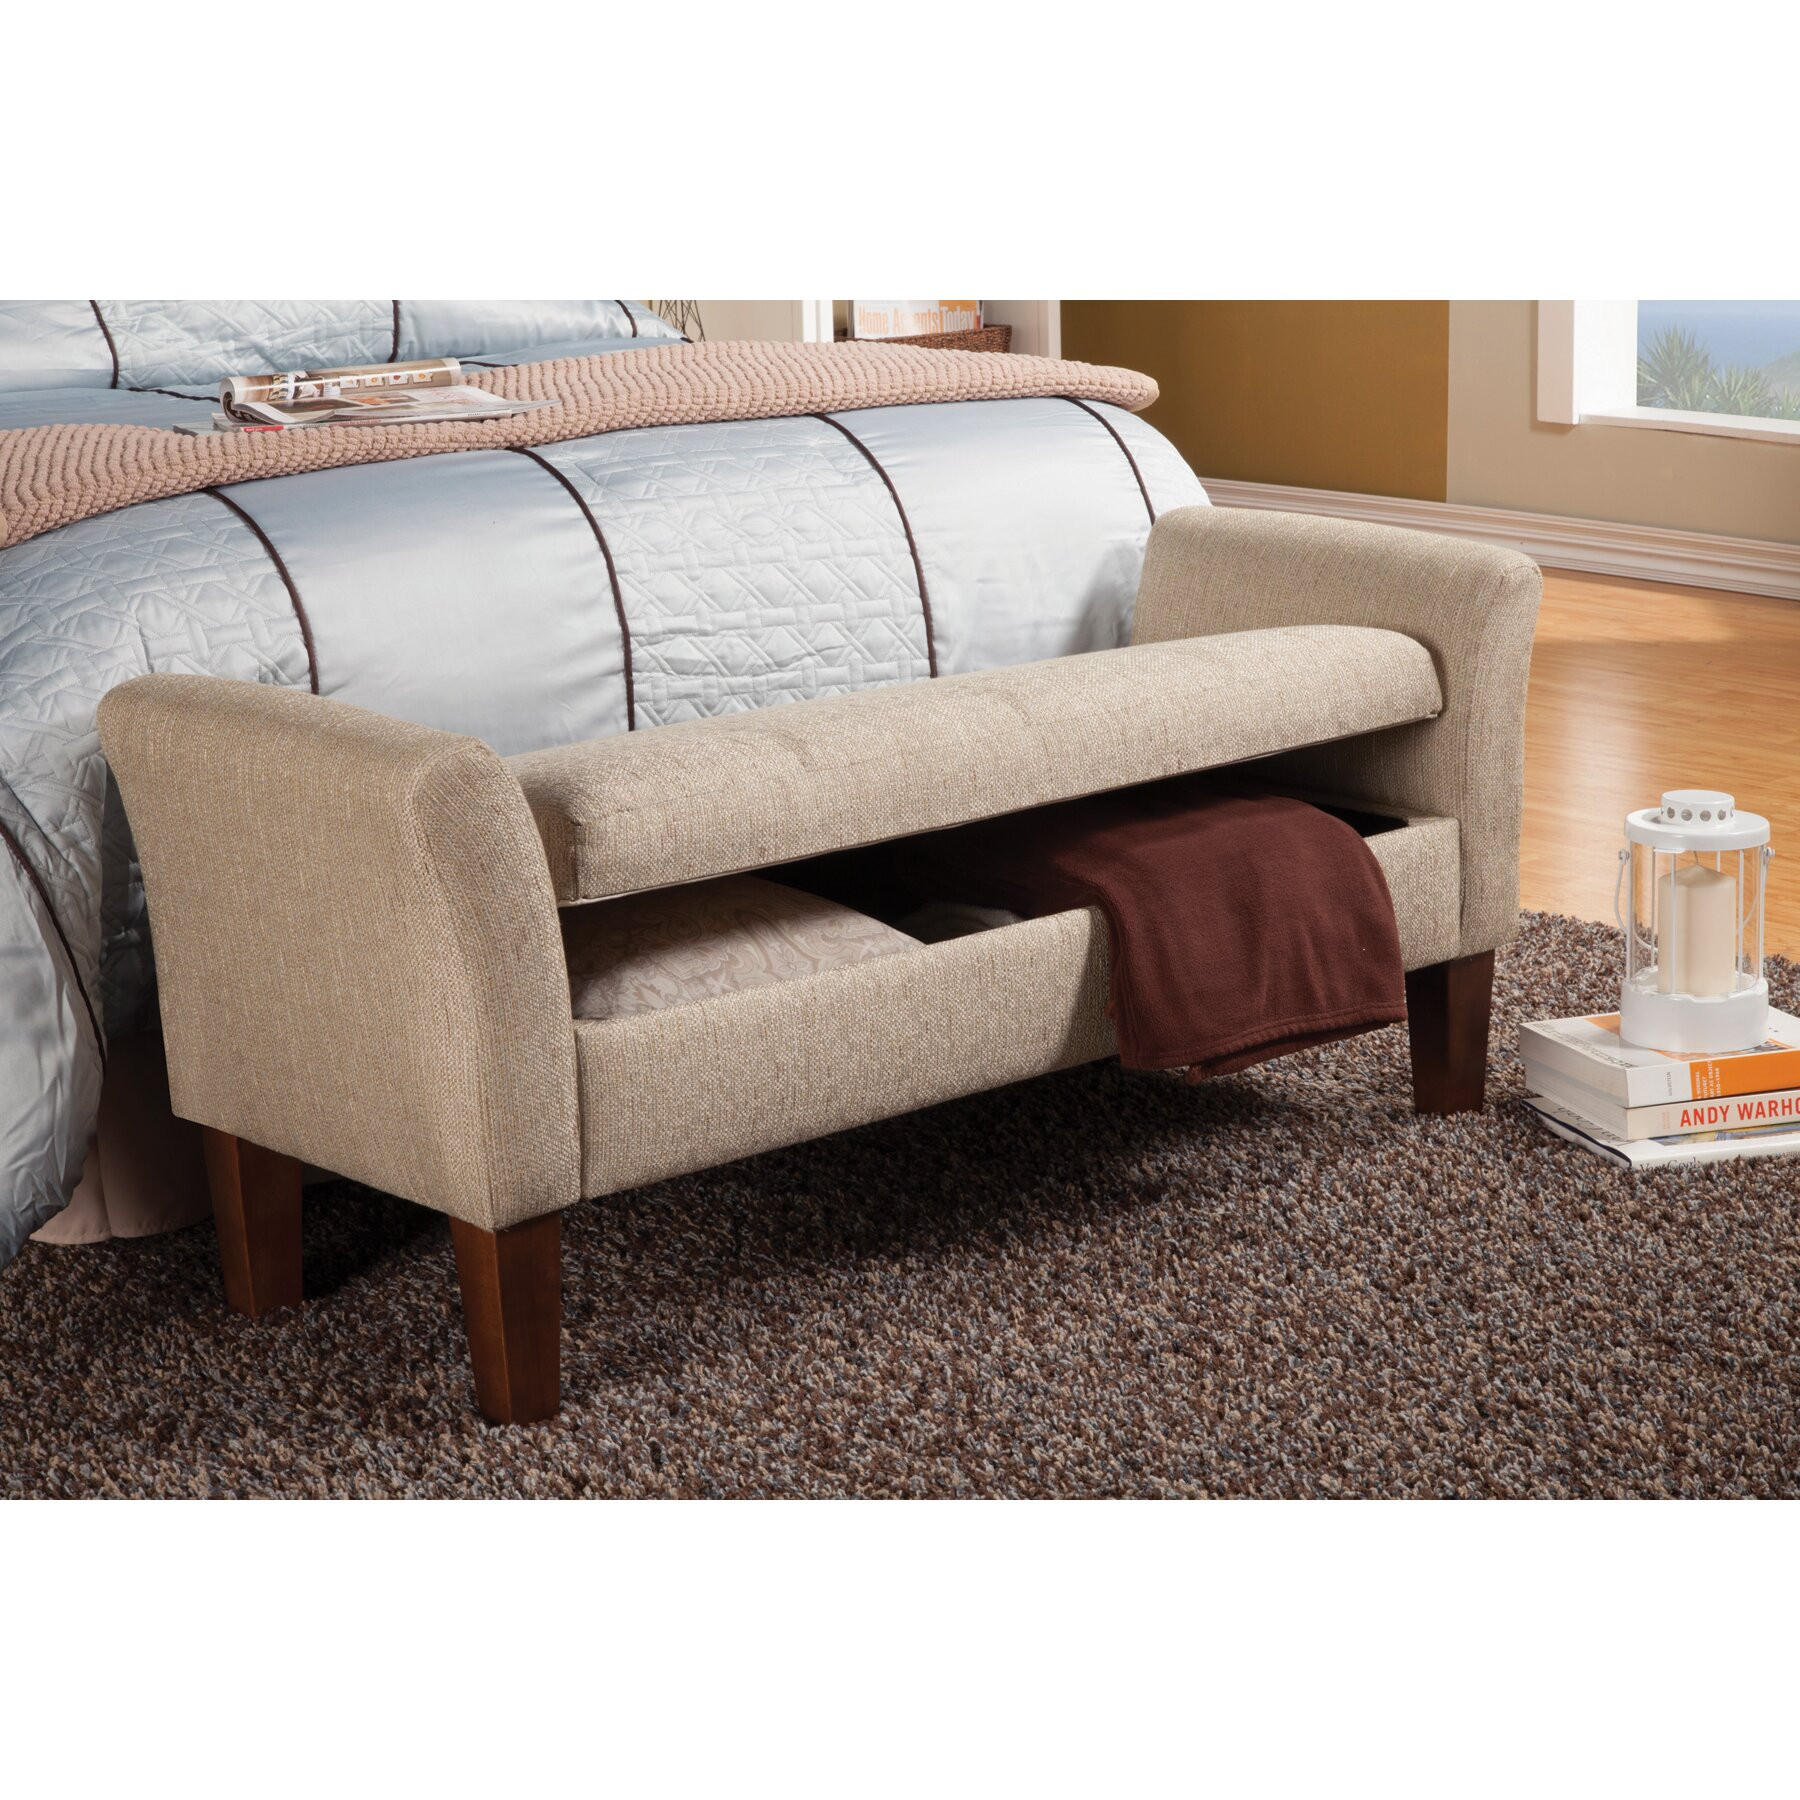 Storage Bed Benches
 Wildon Home Upholstered Storage Bedroom Bench & Reviews